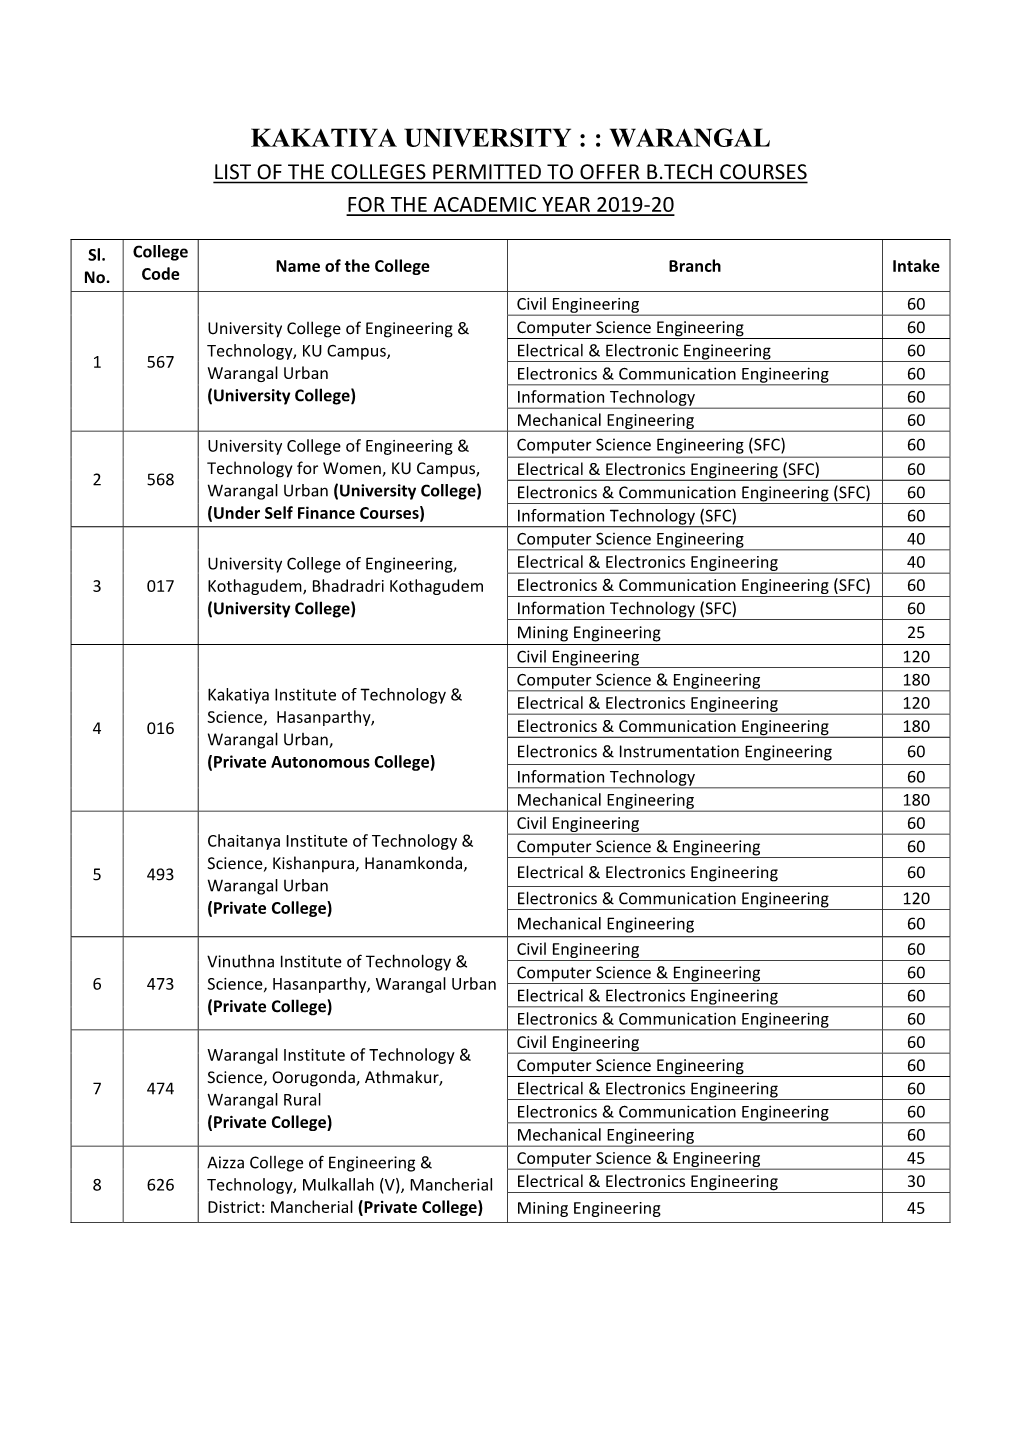 Kakatiya University : : Warangal List of the Colleges Permitted to Offer B.Tech Courses for the Academic Year 2019‐20